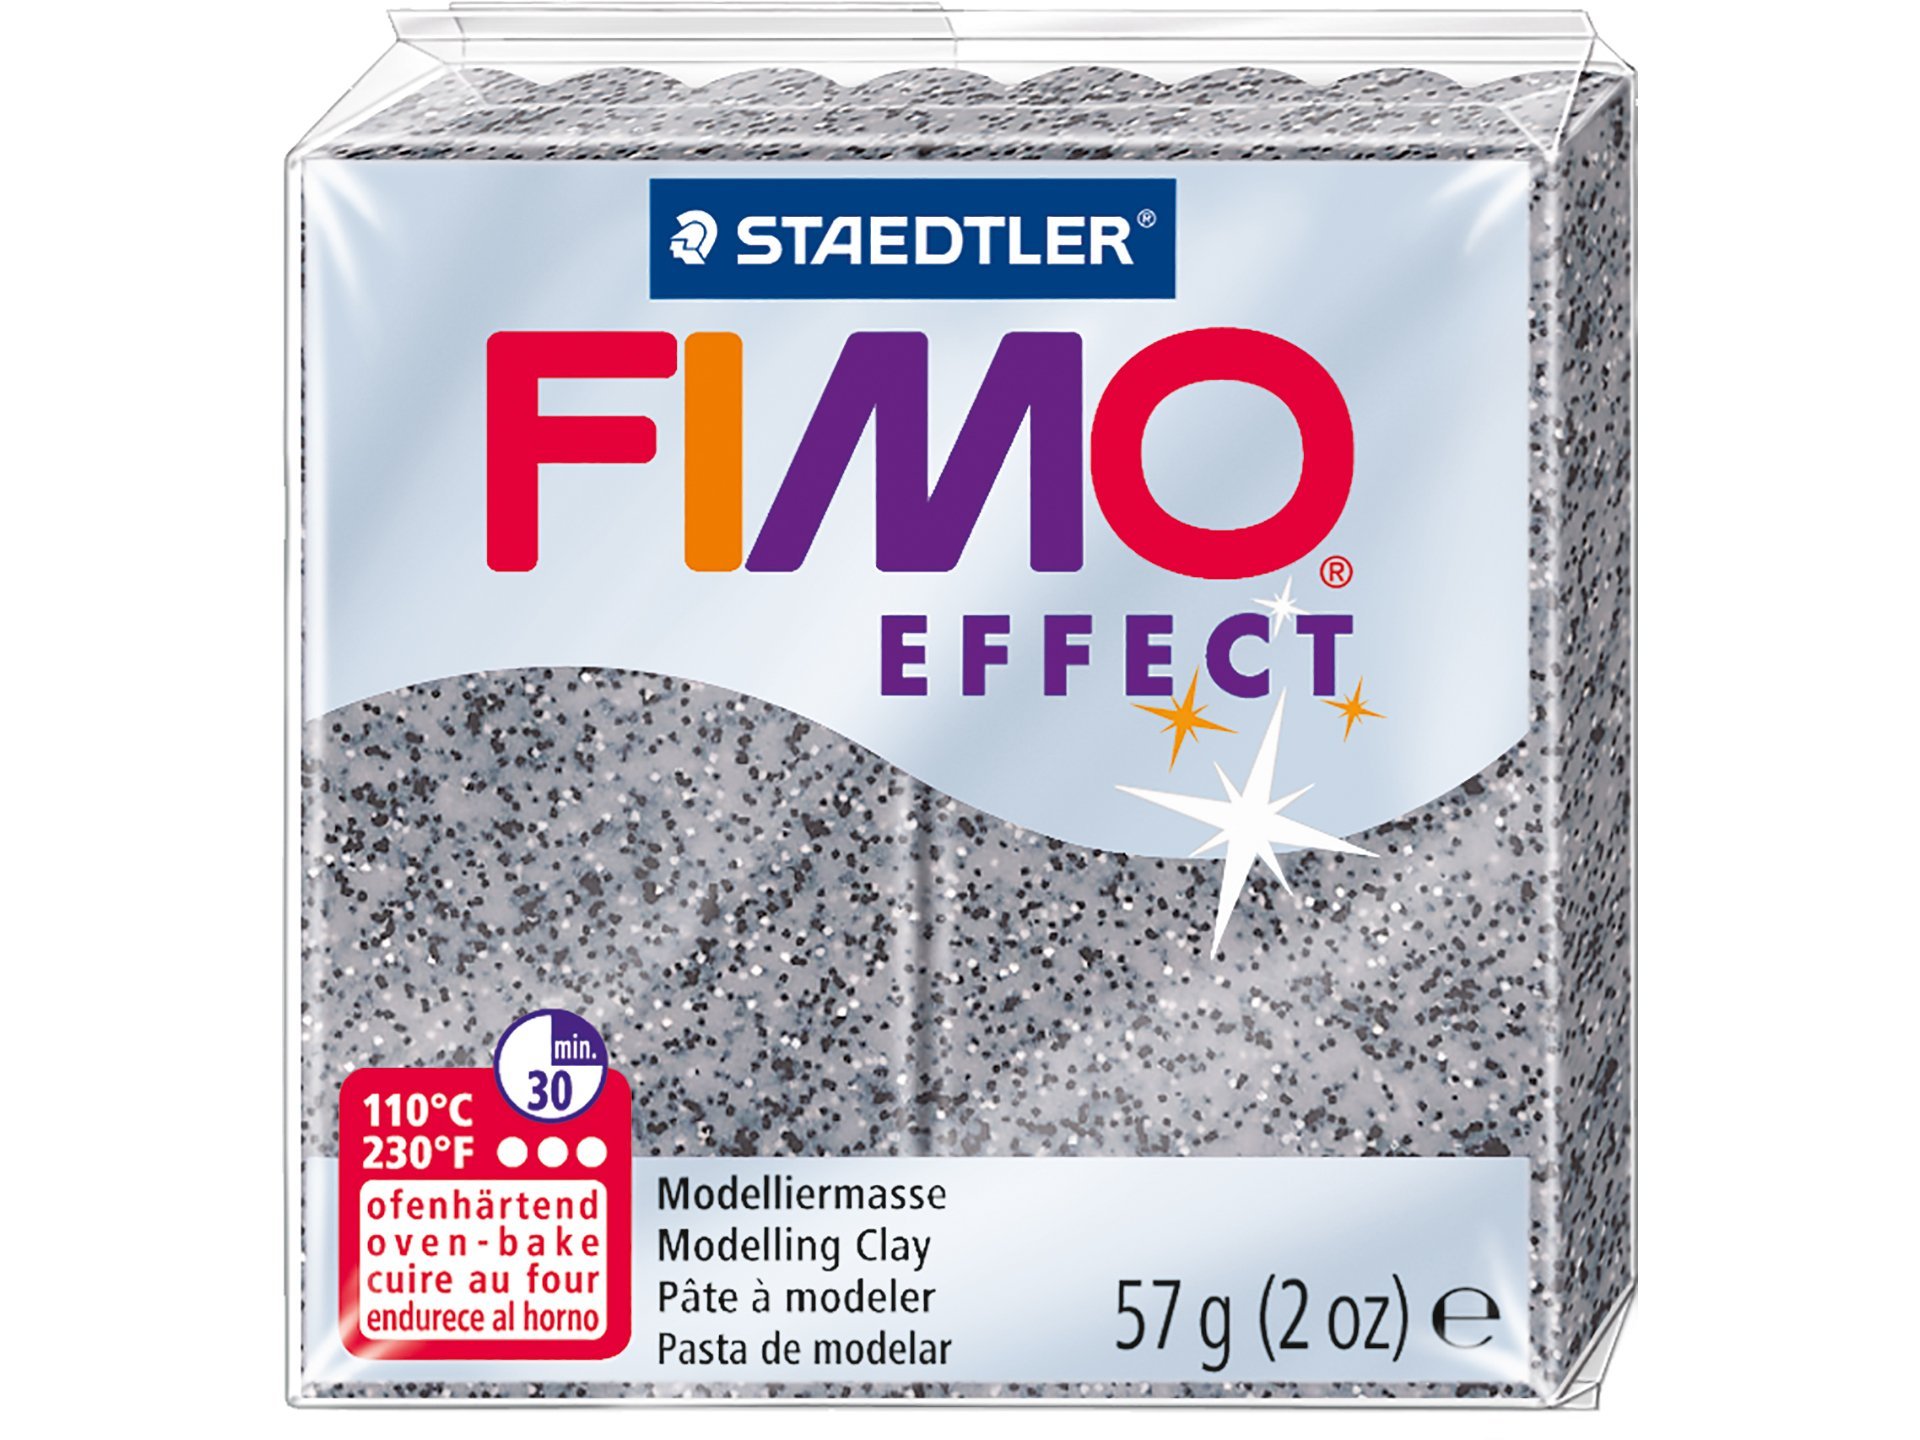 Buy Fimo Air Light Microwave modelling clay, coloured online at Modulor